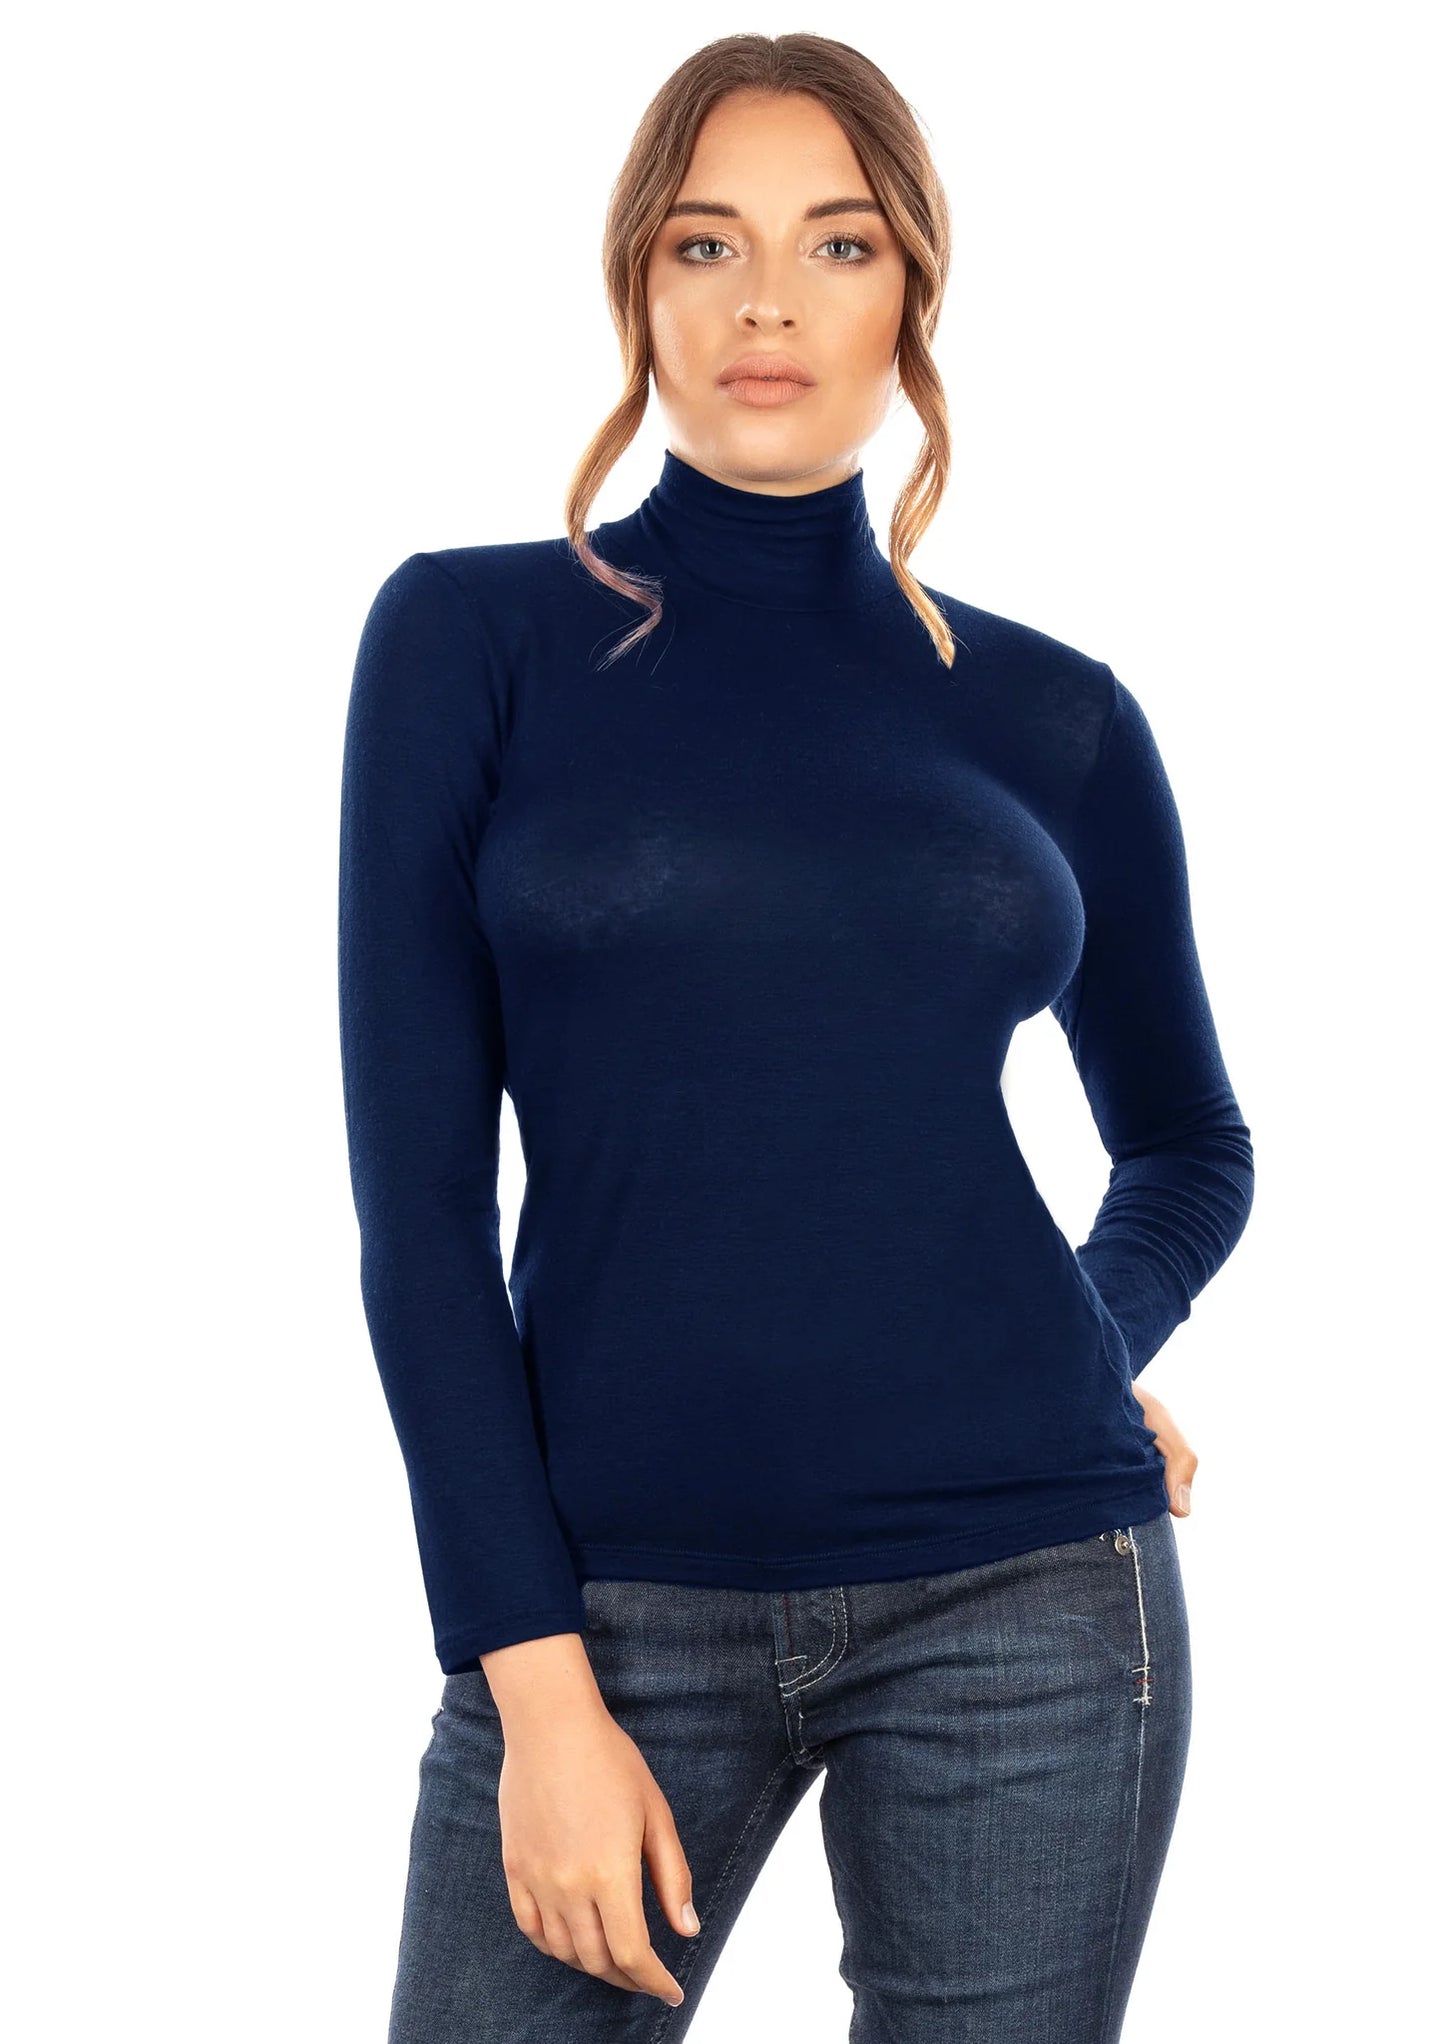 Women's long-sleeved turtleneck sweater in ultralight Modal and Cashmere - Made in Italy - 5249